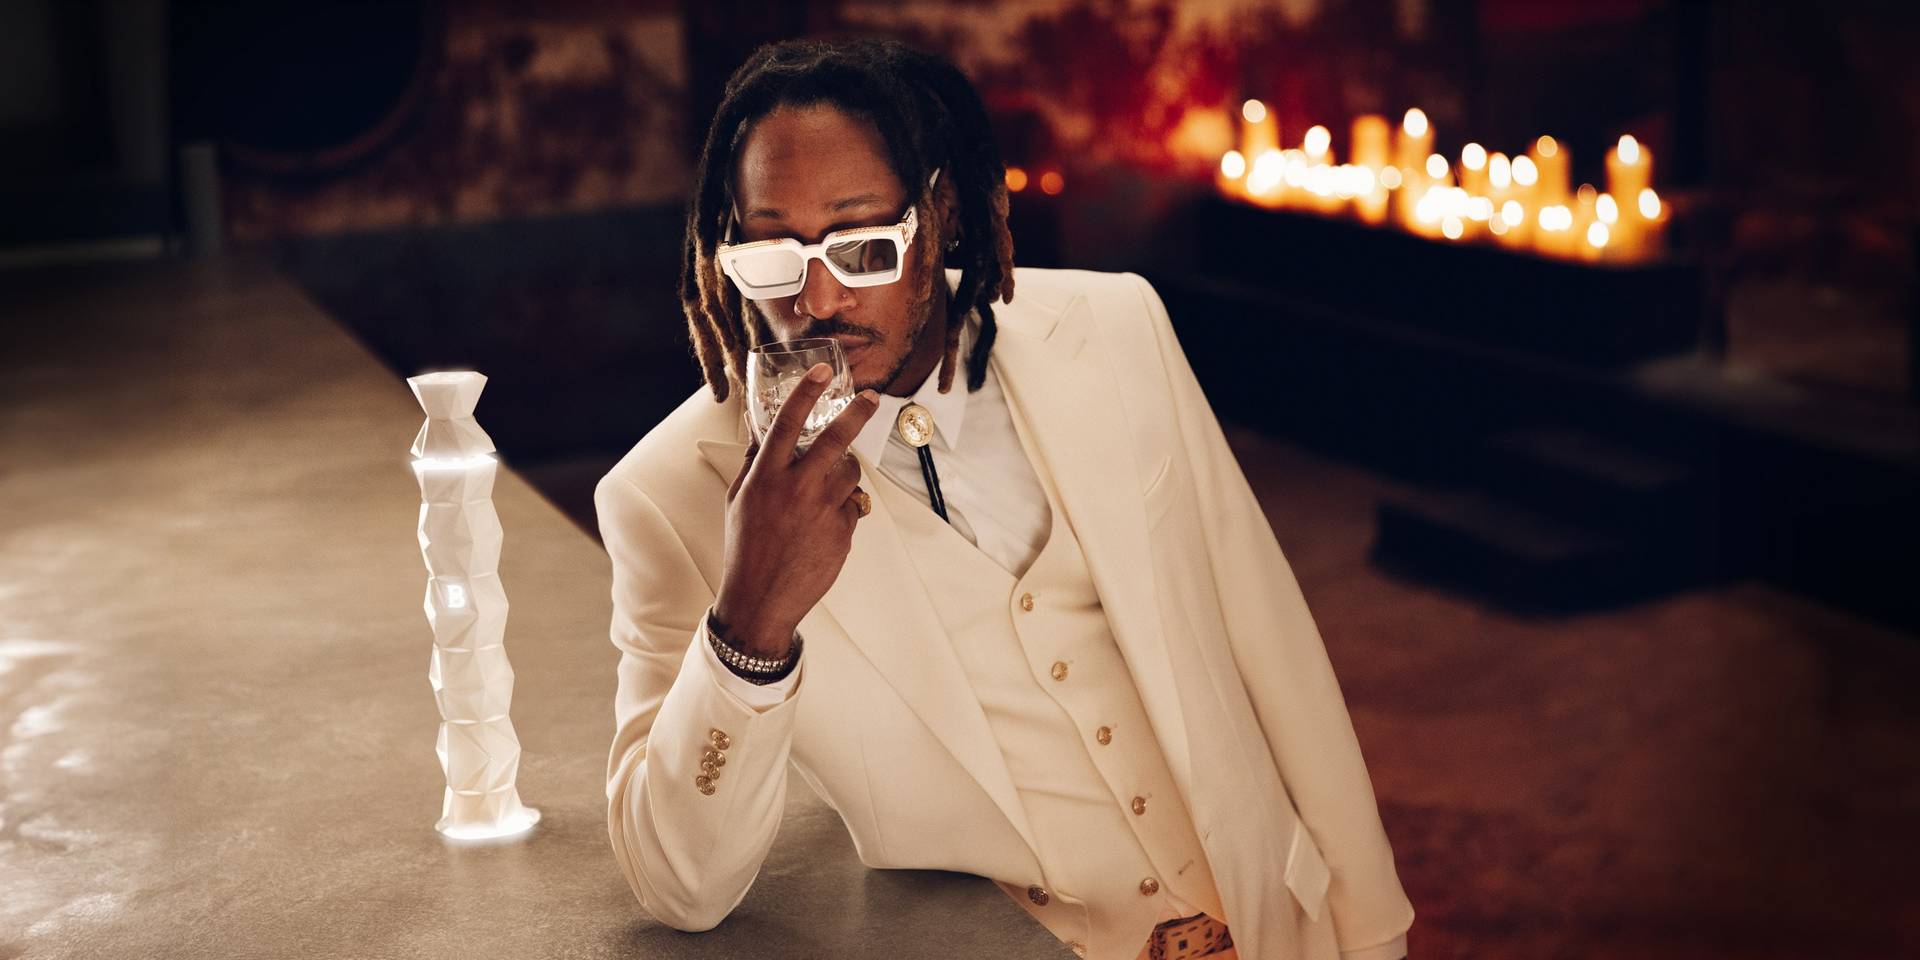 Global music icon Future sipping the Belvedere 10 luxury vodka.